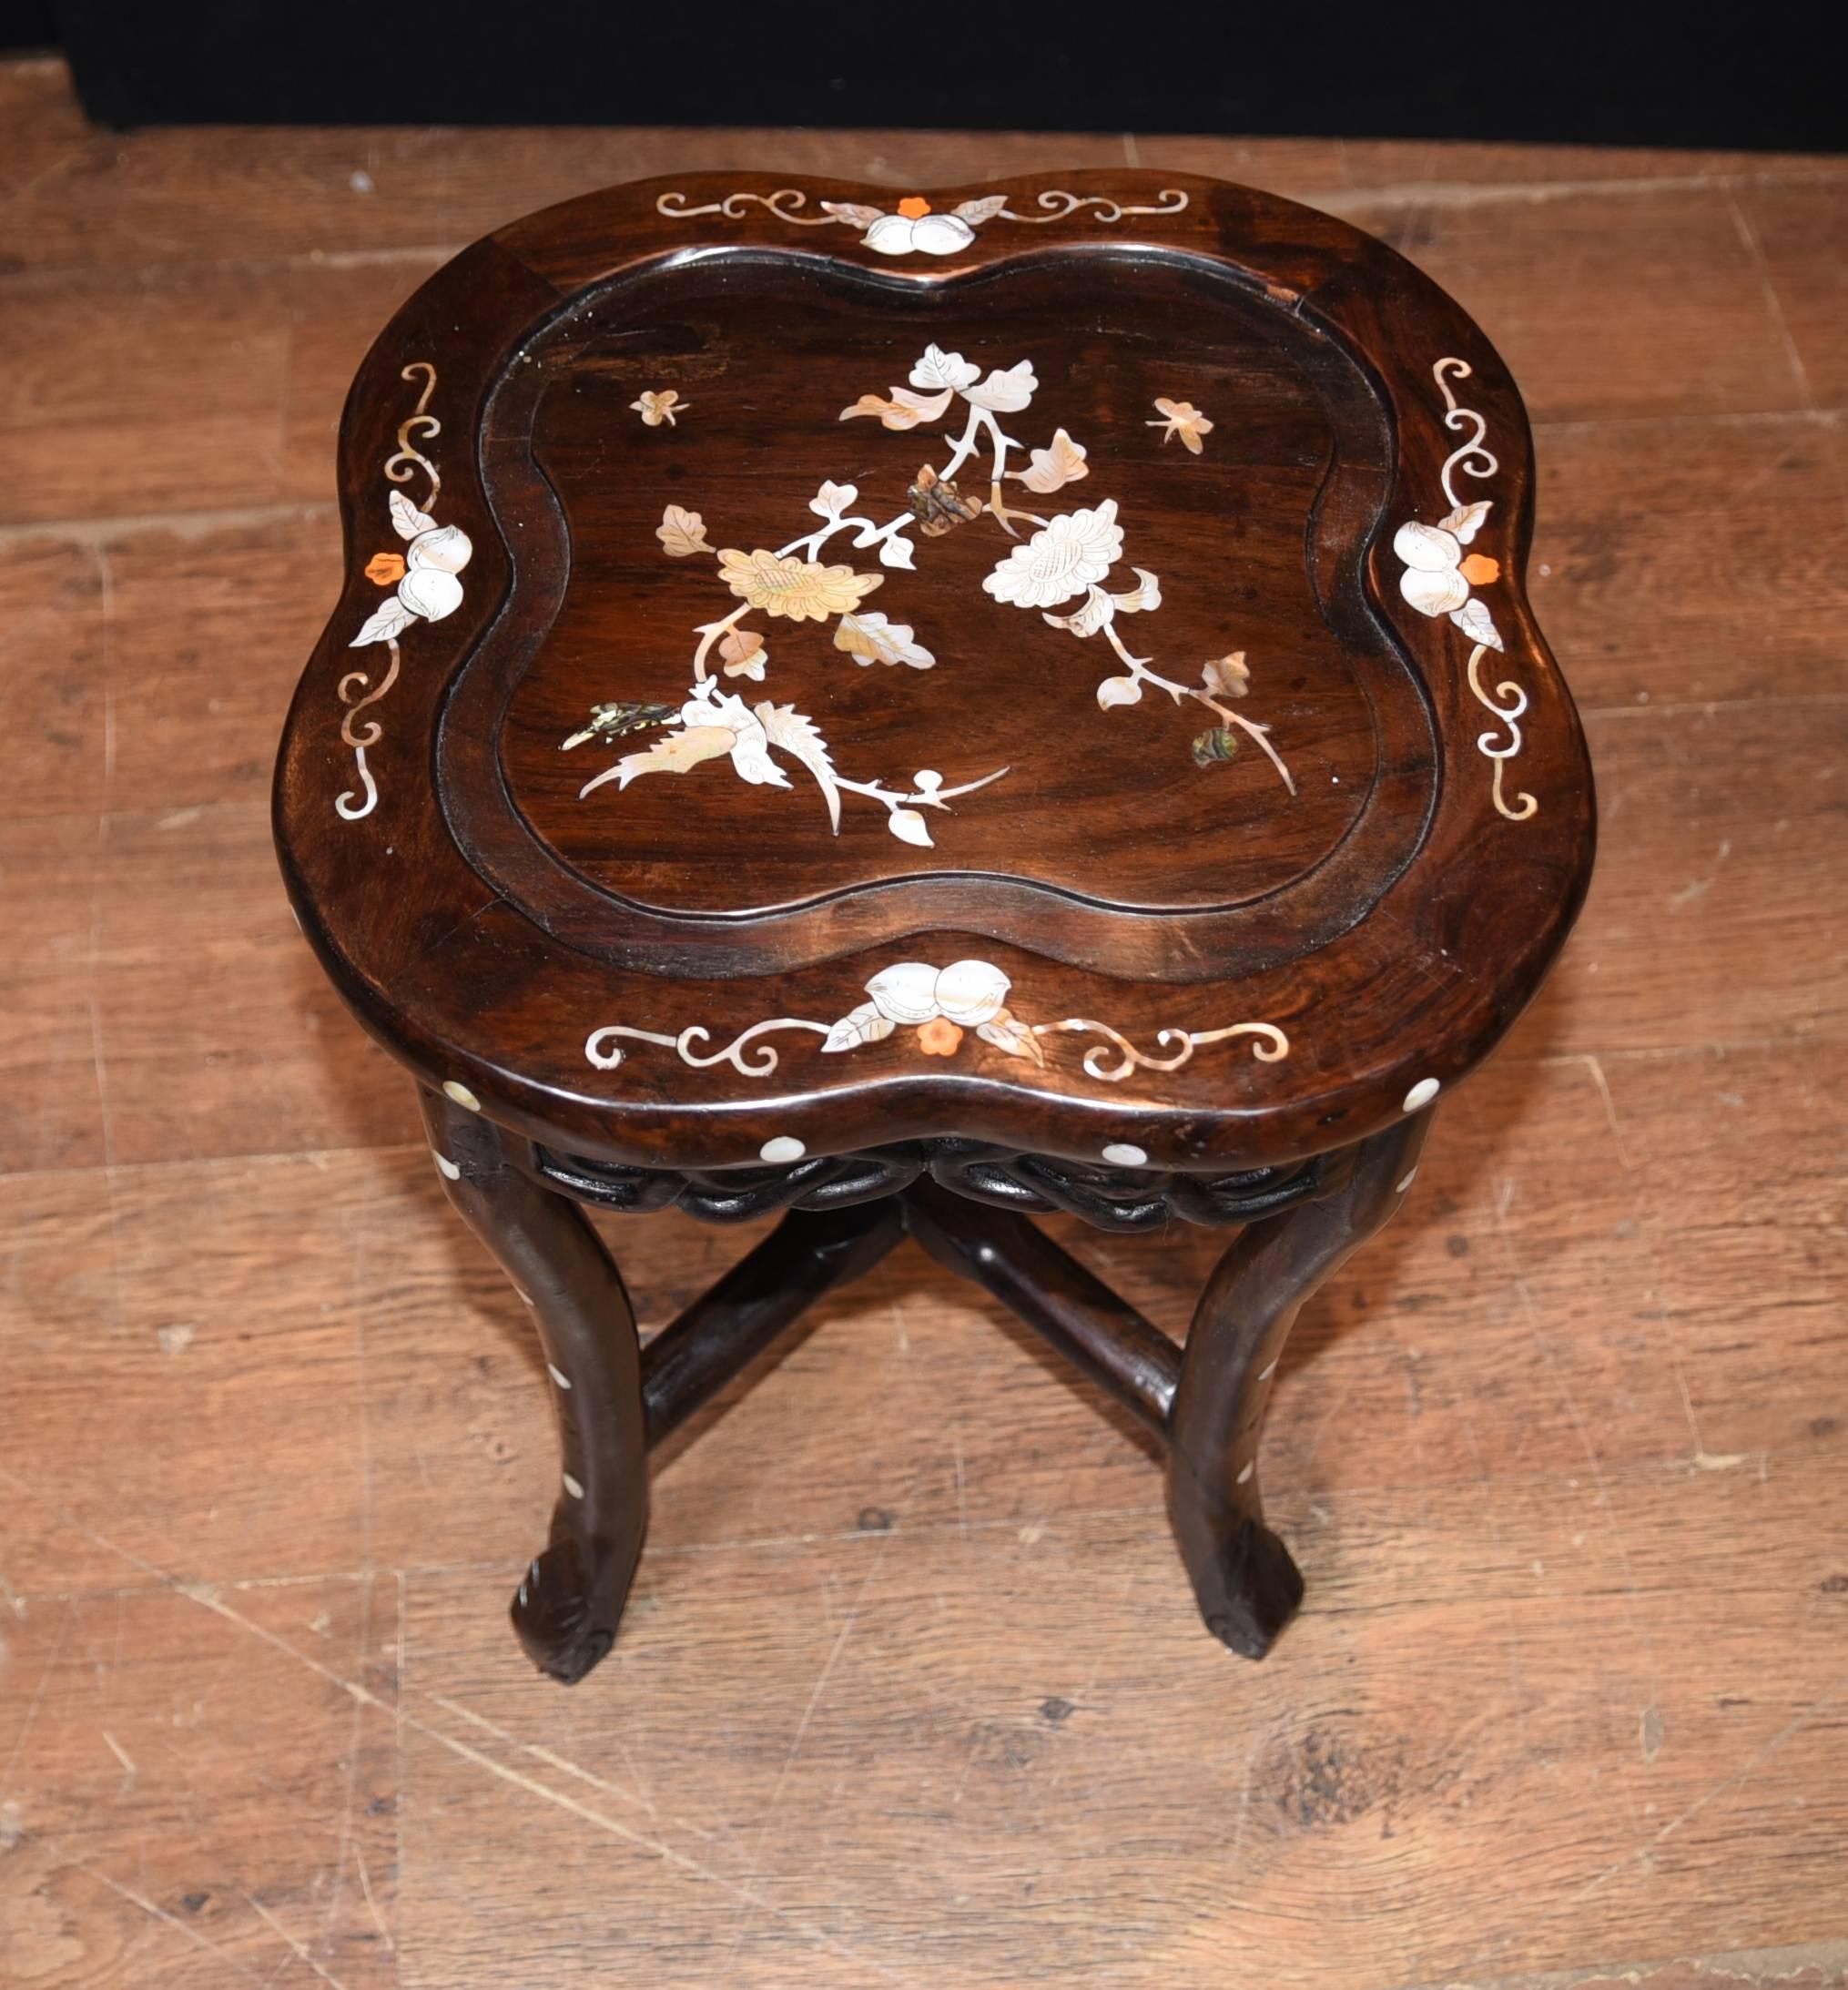 Antique Chinese Table Stool Dining Set Mother-of-Pearl Inlay Hardwood In Good Condition For Sale In Potters Bar, Herts